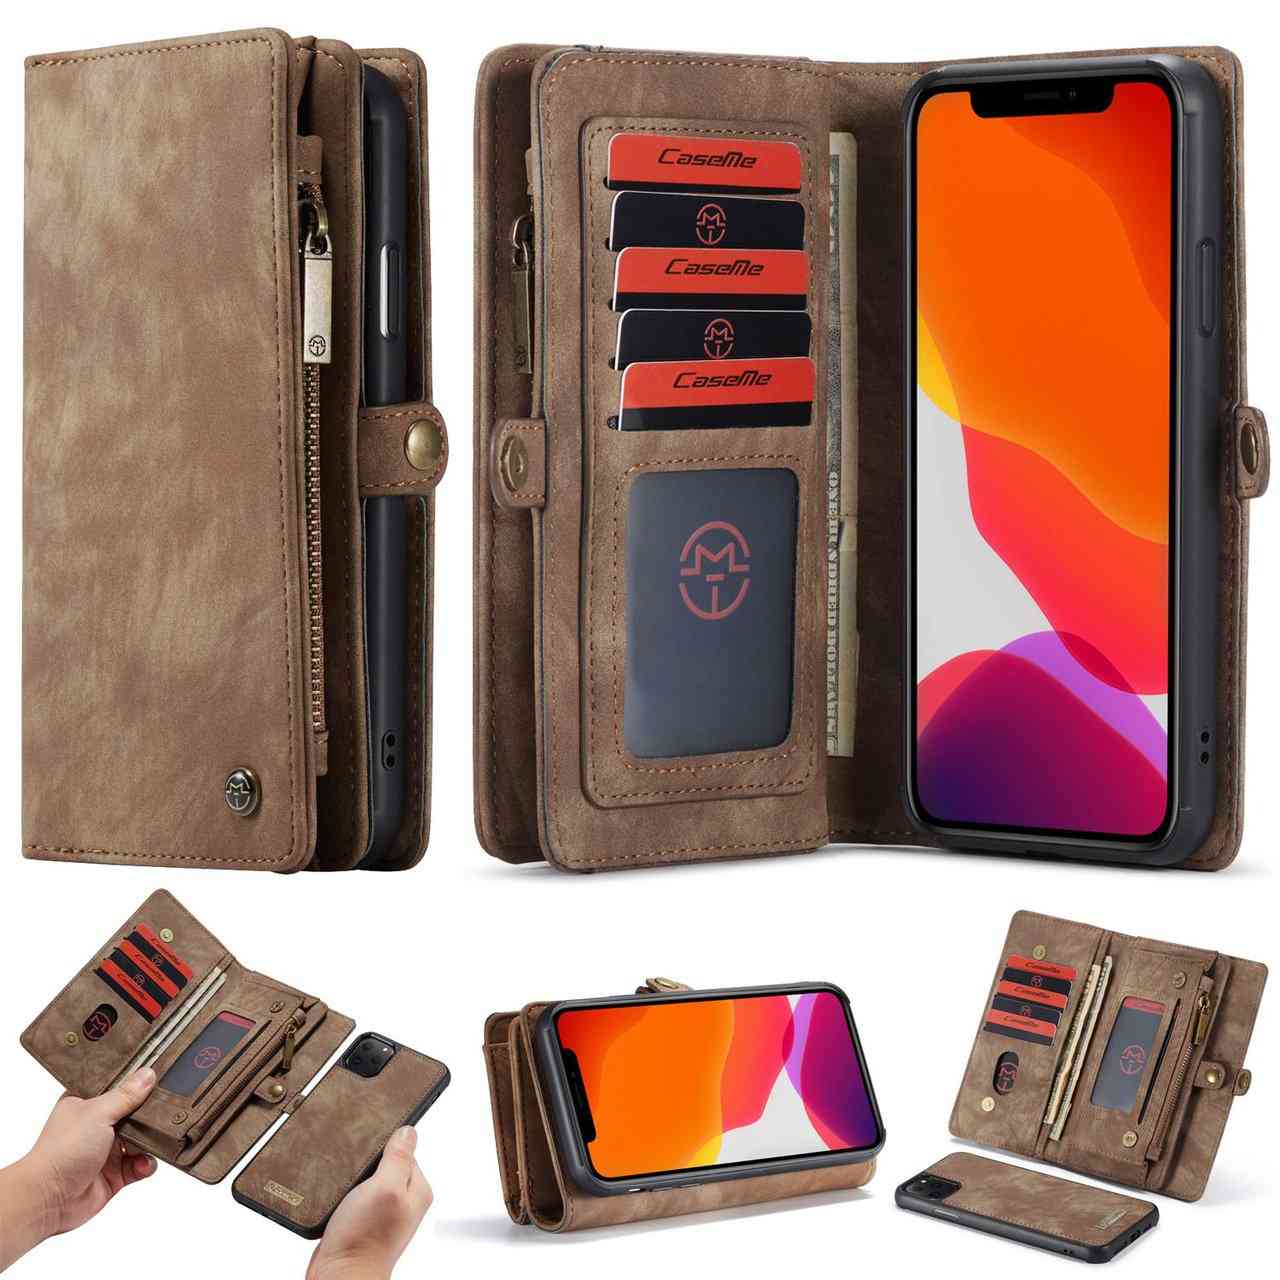 High Capacity Card Wallet Case For Iphone 6, 12 Pro Max